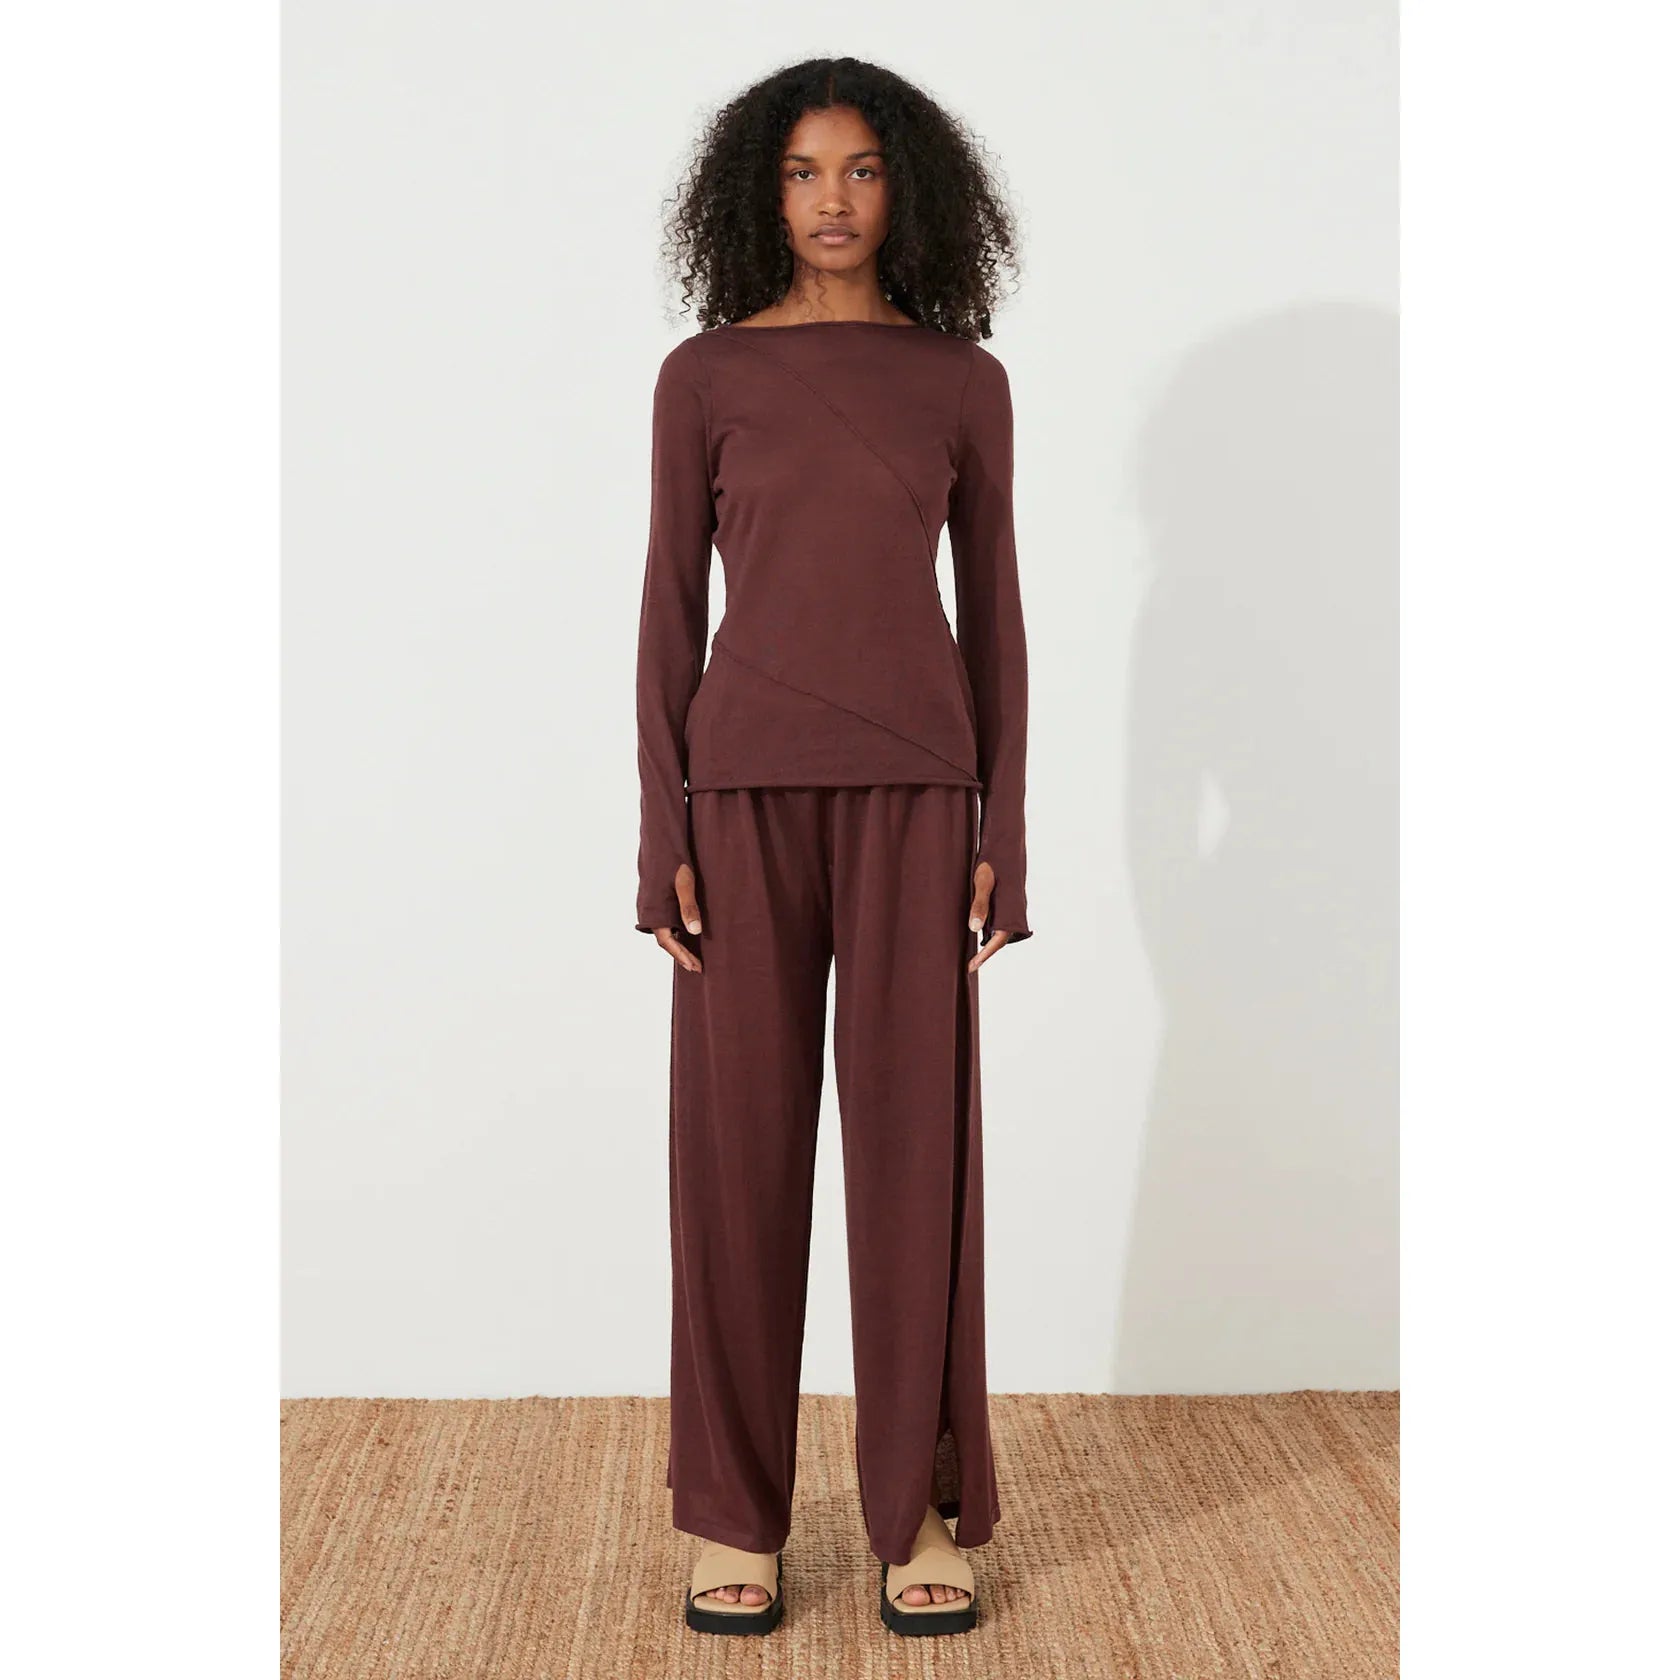 Zulu & Zephyr Currant Relaxed Knit Pant